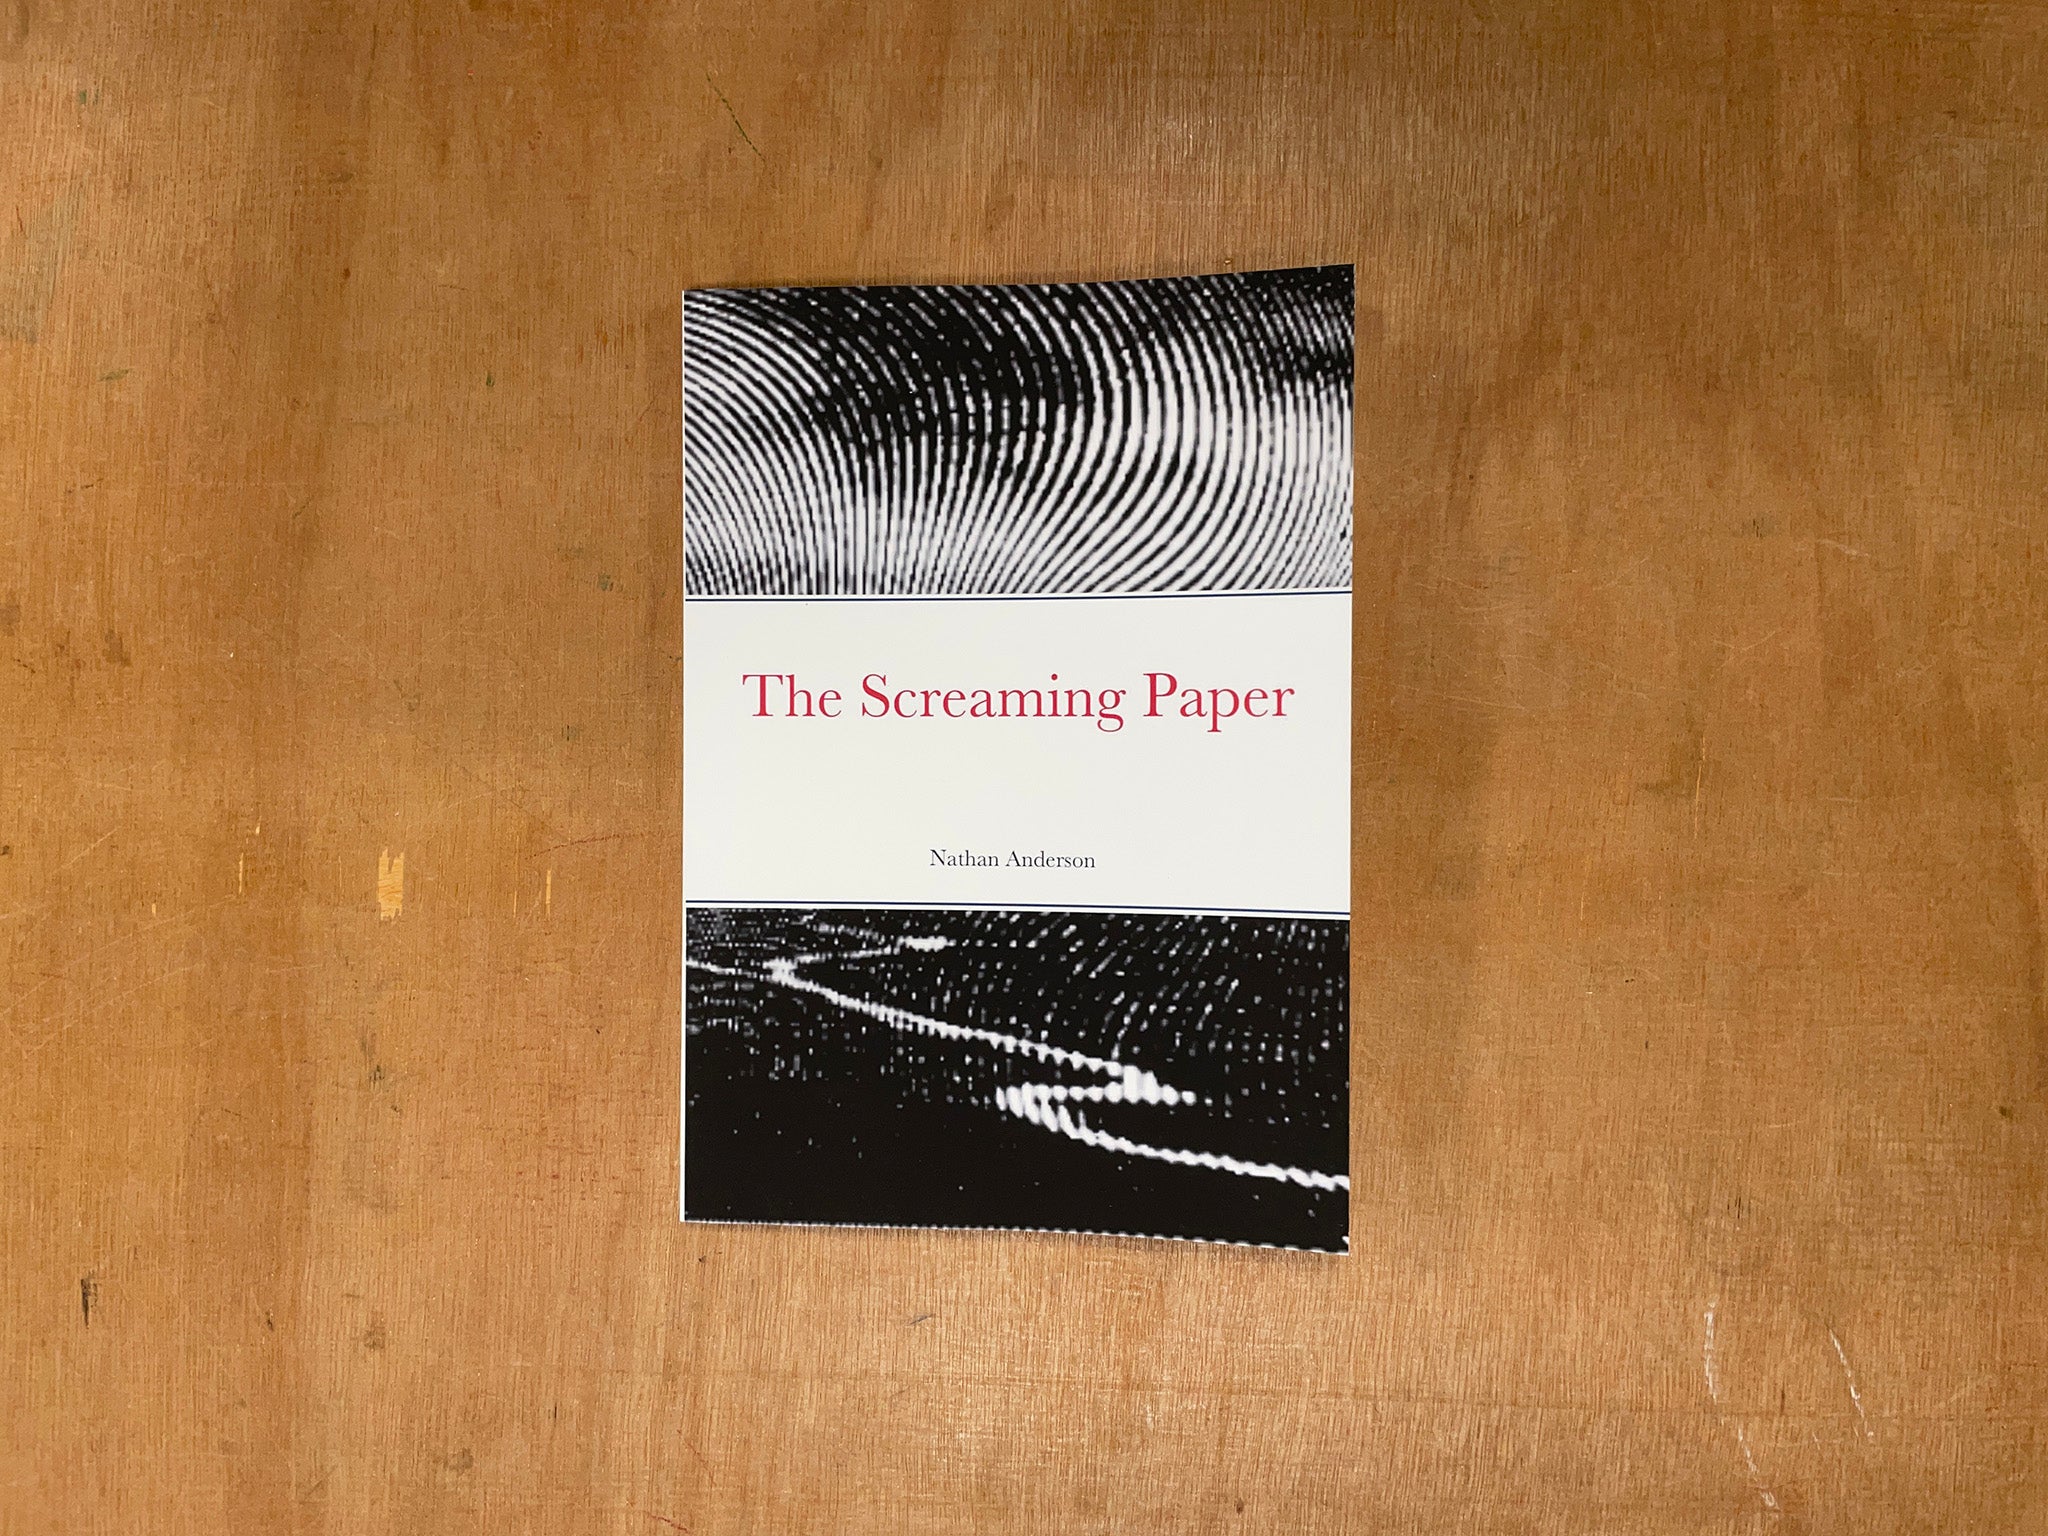 THE SCREAMING PAPER by Nathan Anderson